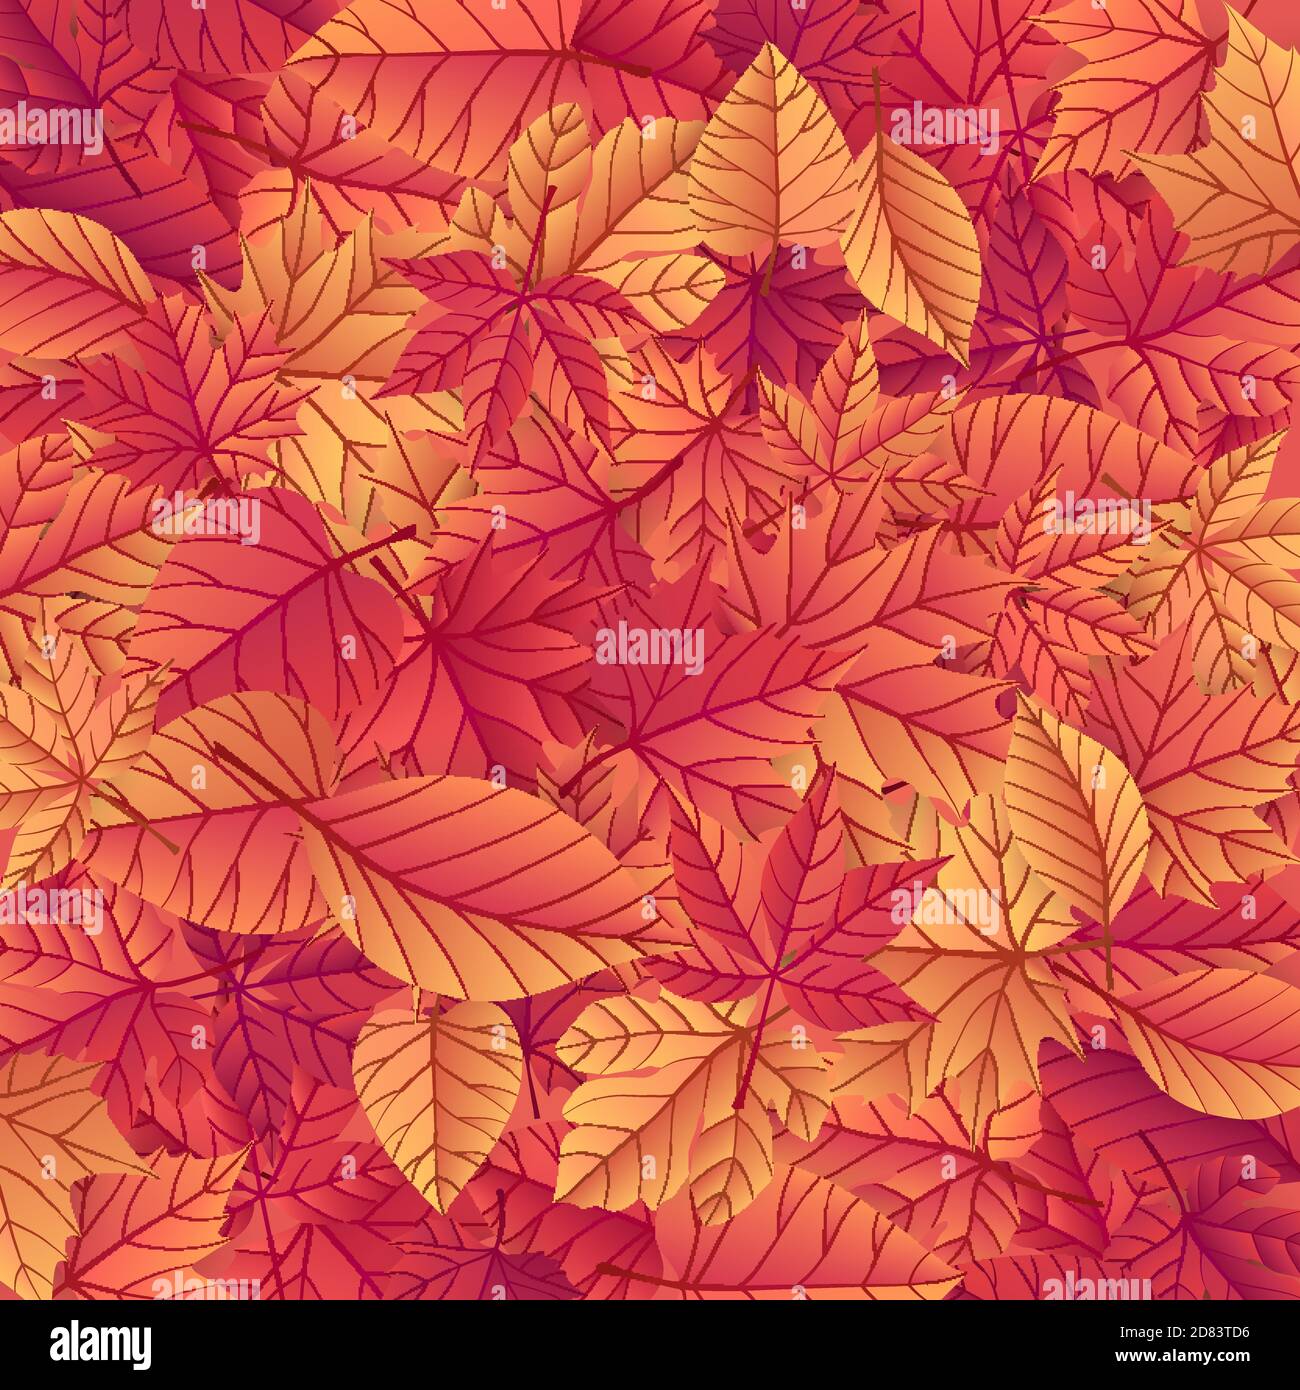 Autumn background with random leaves. Bright fall leaves texture / pattern. ideal for poster, card, label, banner design. Vector illustration. Stock Vector